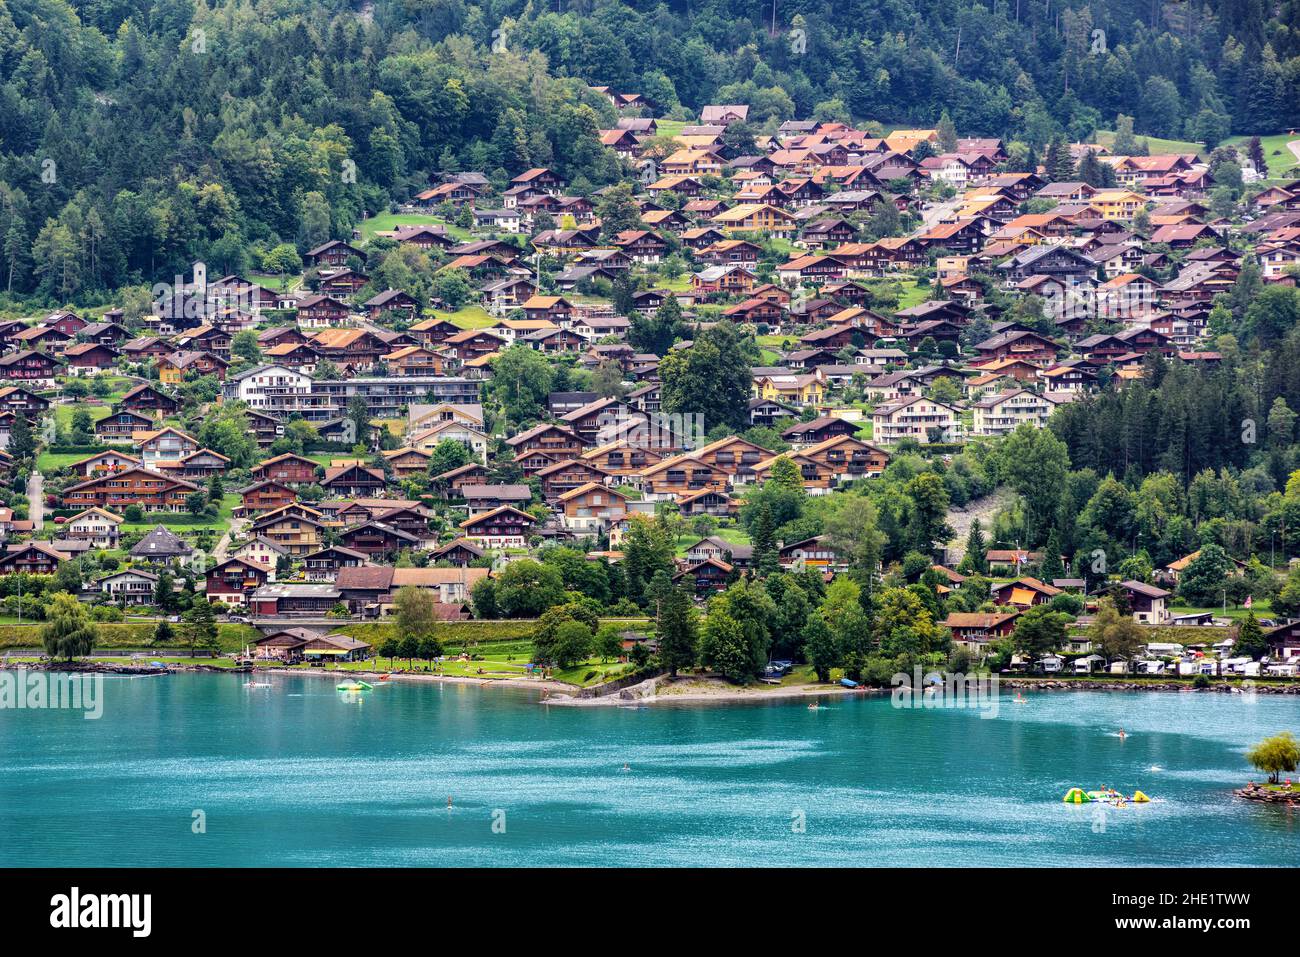 Traditional wooden houses in Brienz town on the alpine Lake Brienz, swiss Alps, Switzerland Stock Photo